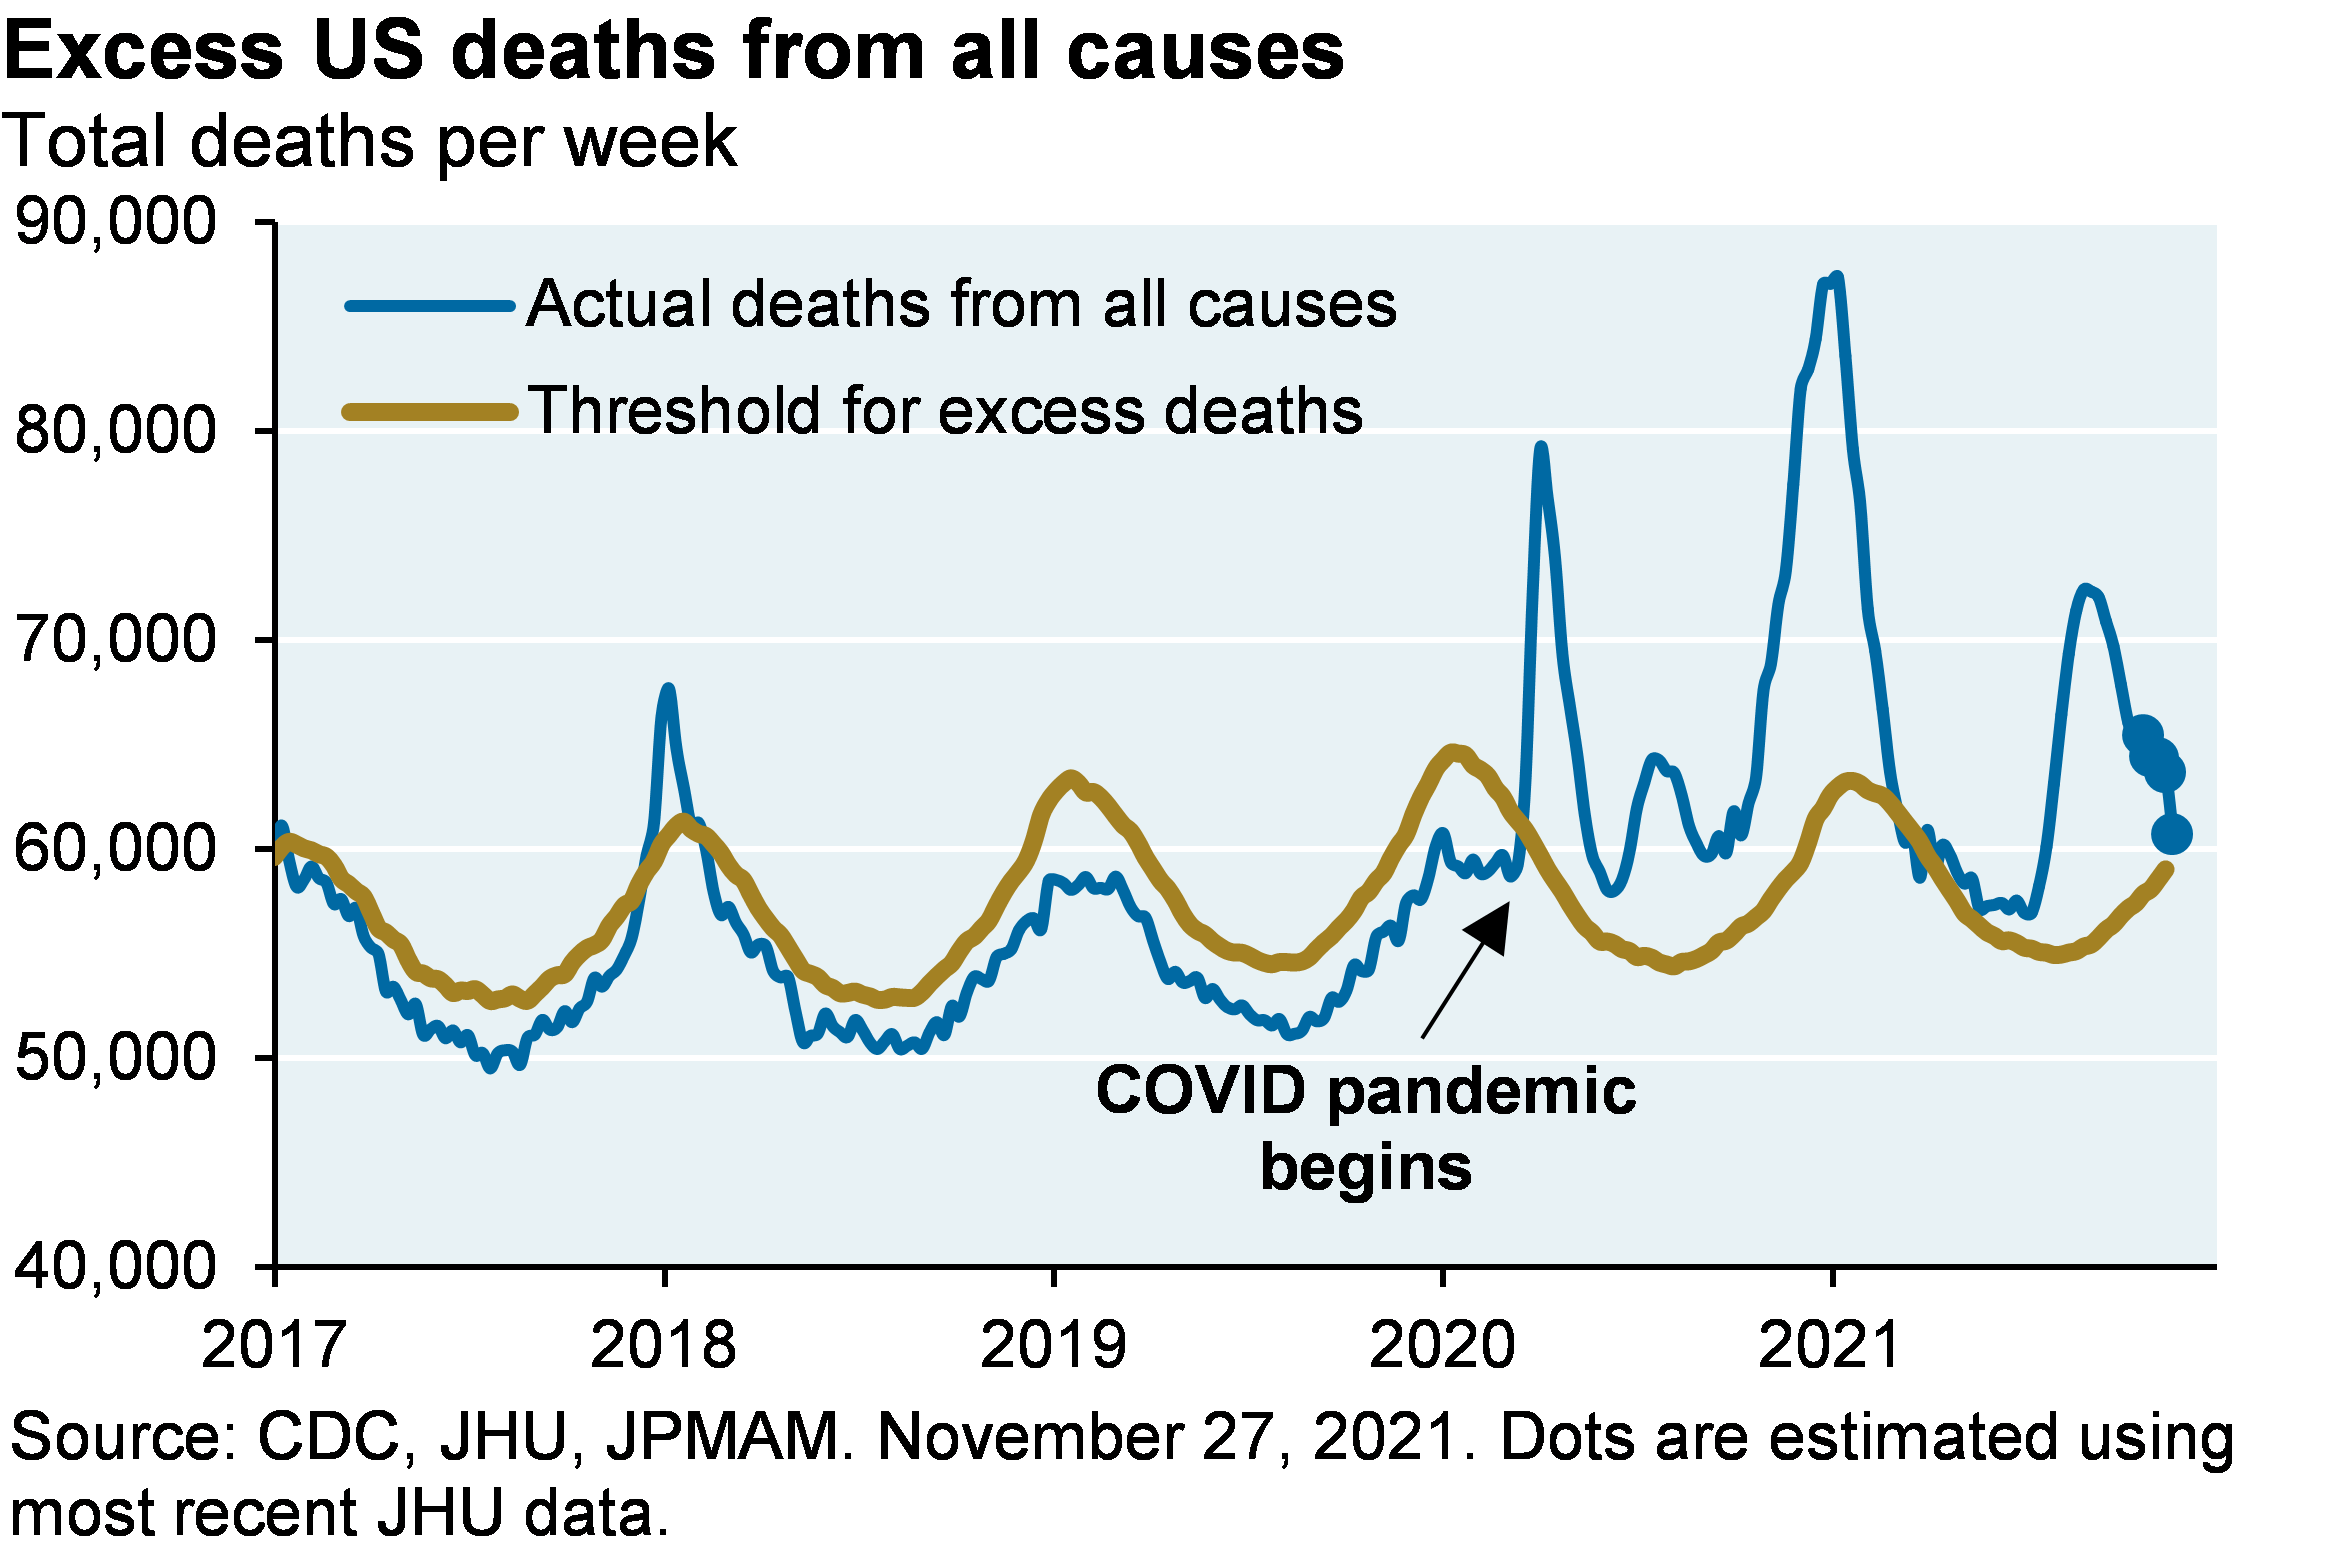 Line chart shows actual US deaths from all causes per week vs the threshold for excess deaths from all causes from 2017 to 2021. Since the COVID-19 pandemic began, actual deaths have exceeded the excess death threshold, especially during COVID waves